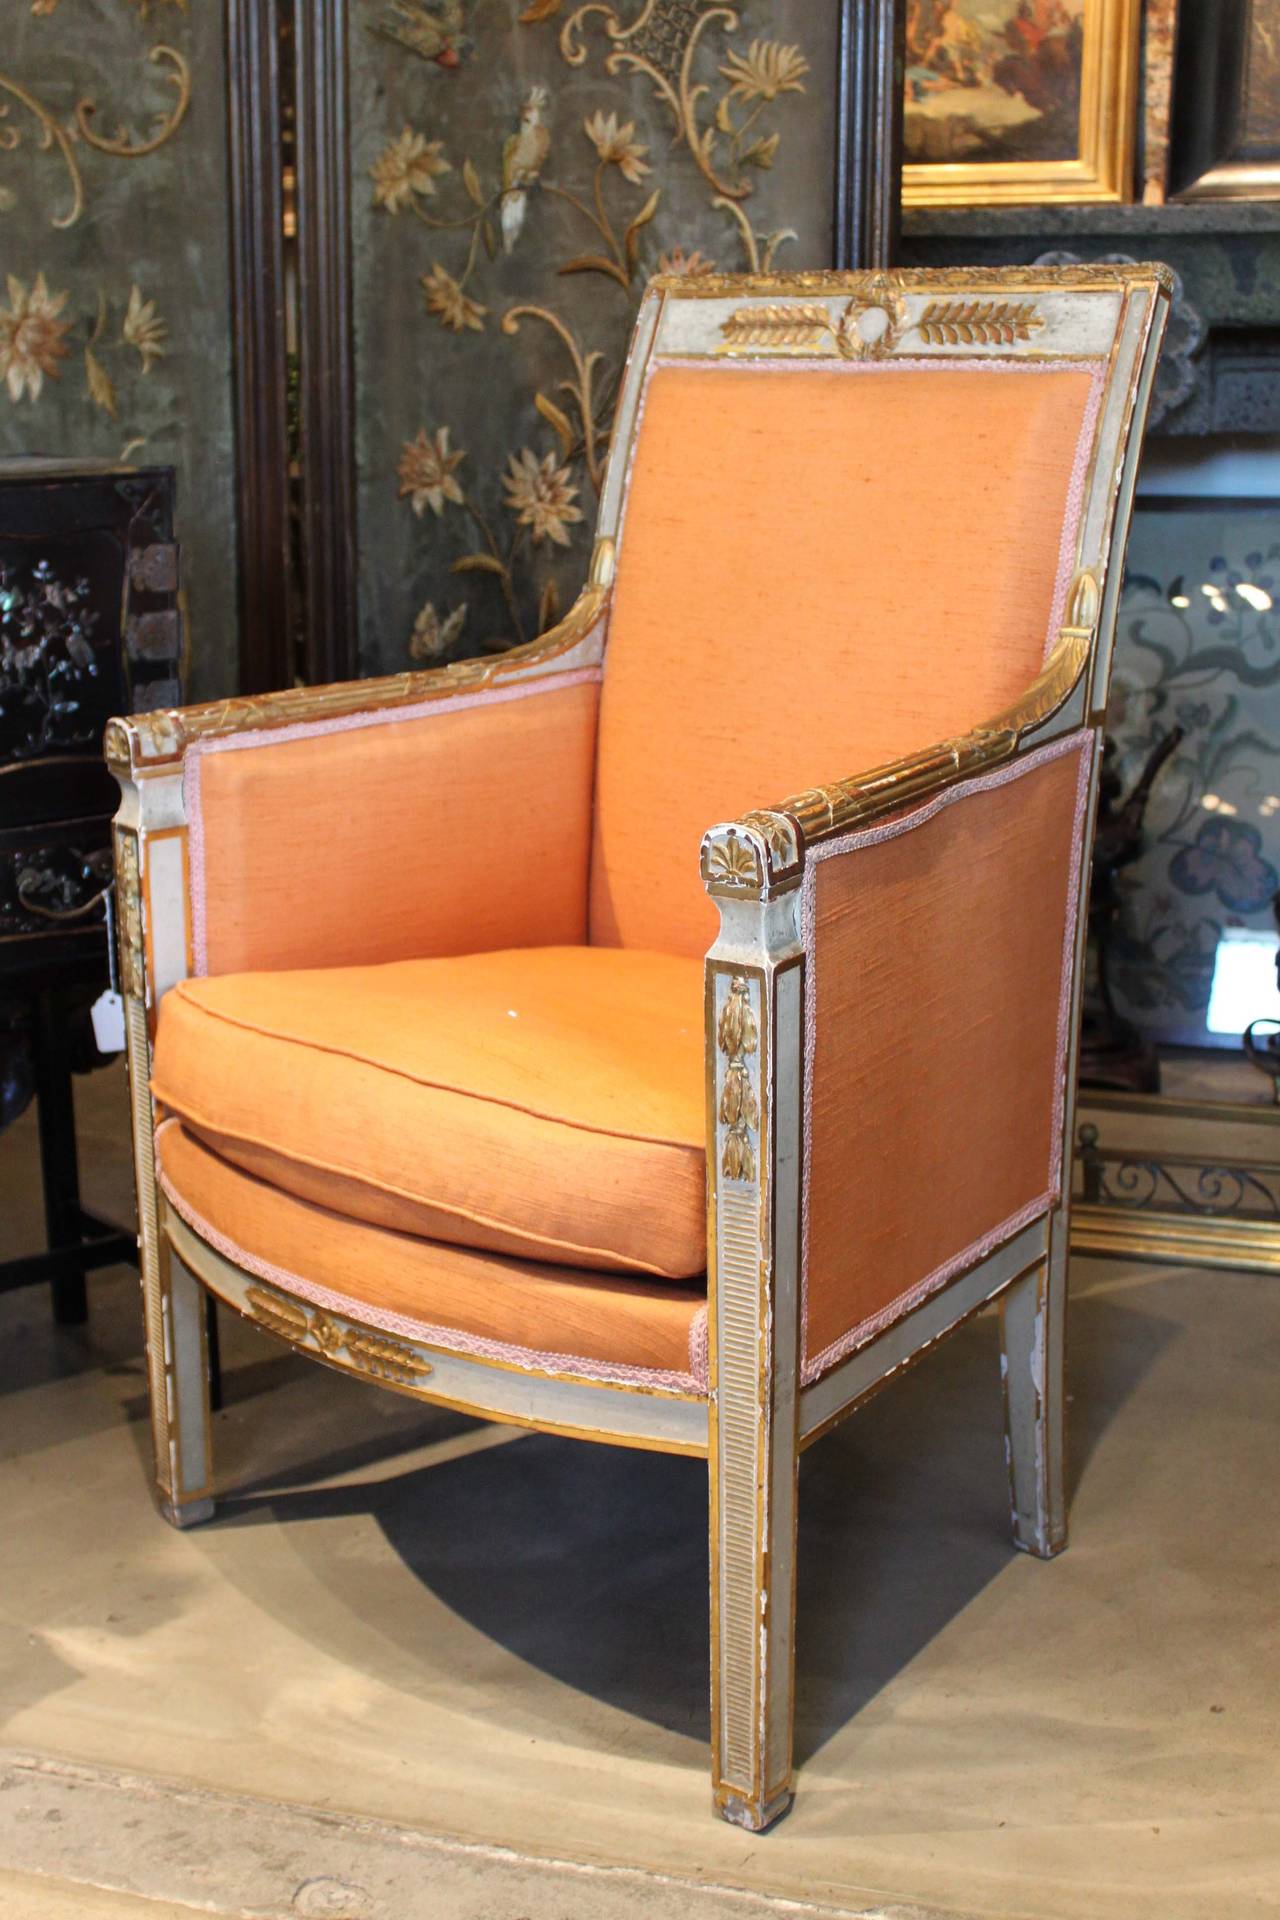 Exceptional French Directoire chair attributed to Jacob Frères with gilded carved Gessoe applique and Napoleonic crest, France, circa 1780.